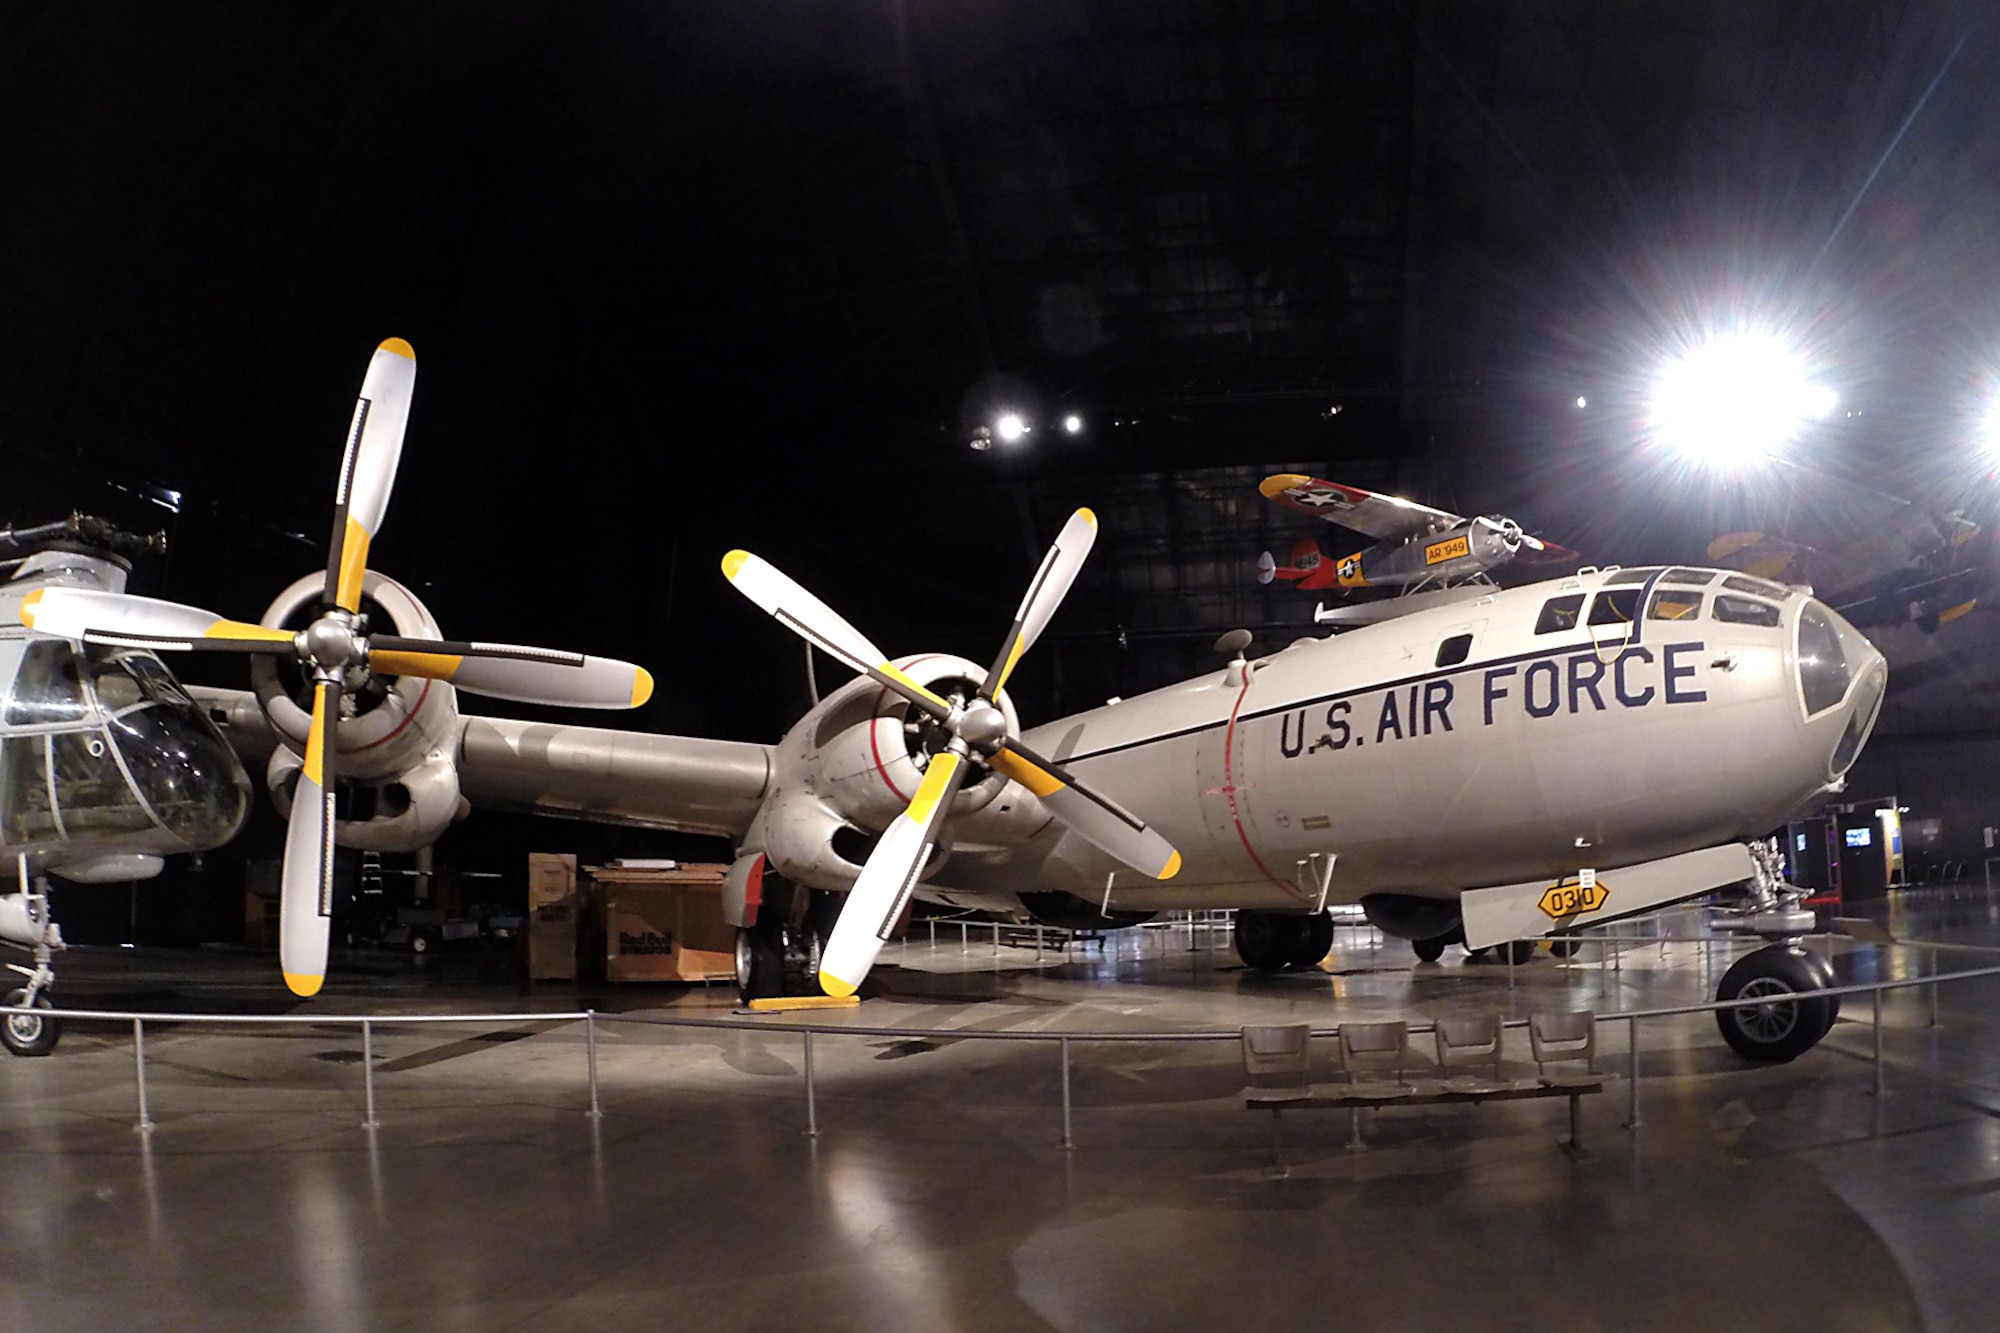 The Boeing WB-50D Superfortress on display in the Cold War Gallery at the National Museum of the U.S. Air Force. (U.S. Air Force photo)
